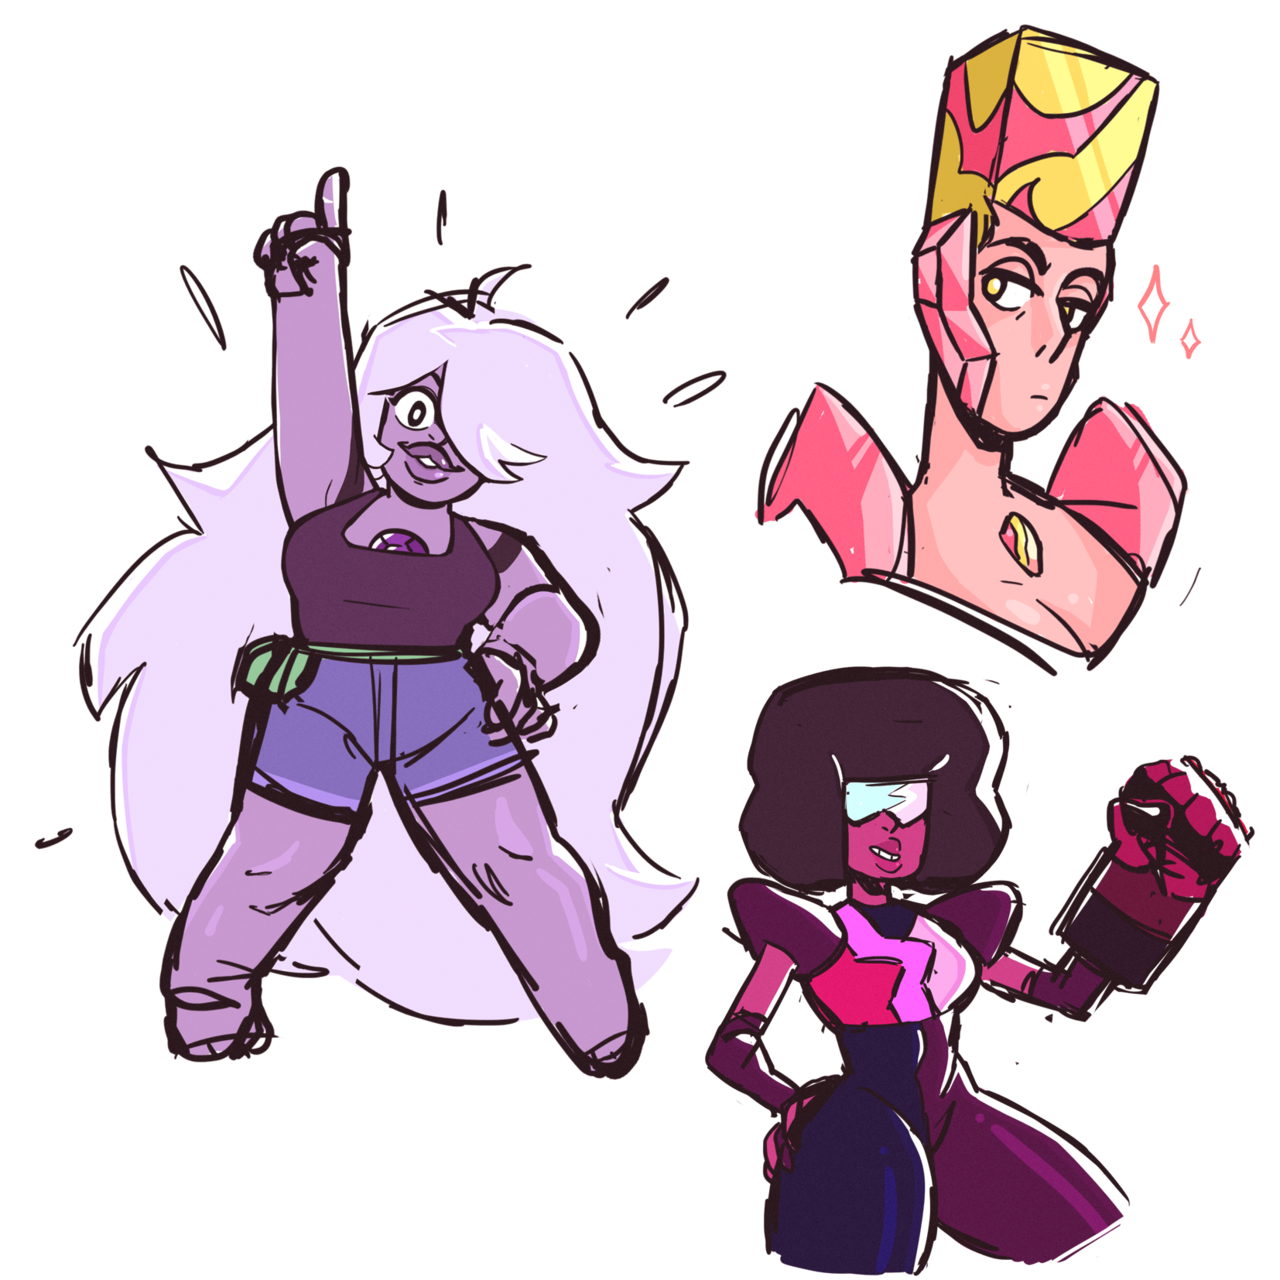 Sketchy gems (forgot Amethyst wears her hair up in her beach clothes)